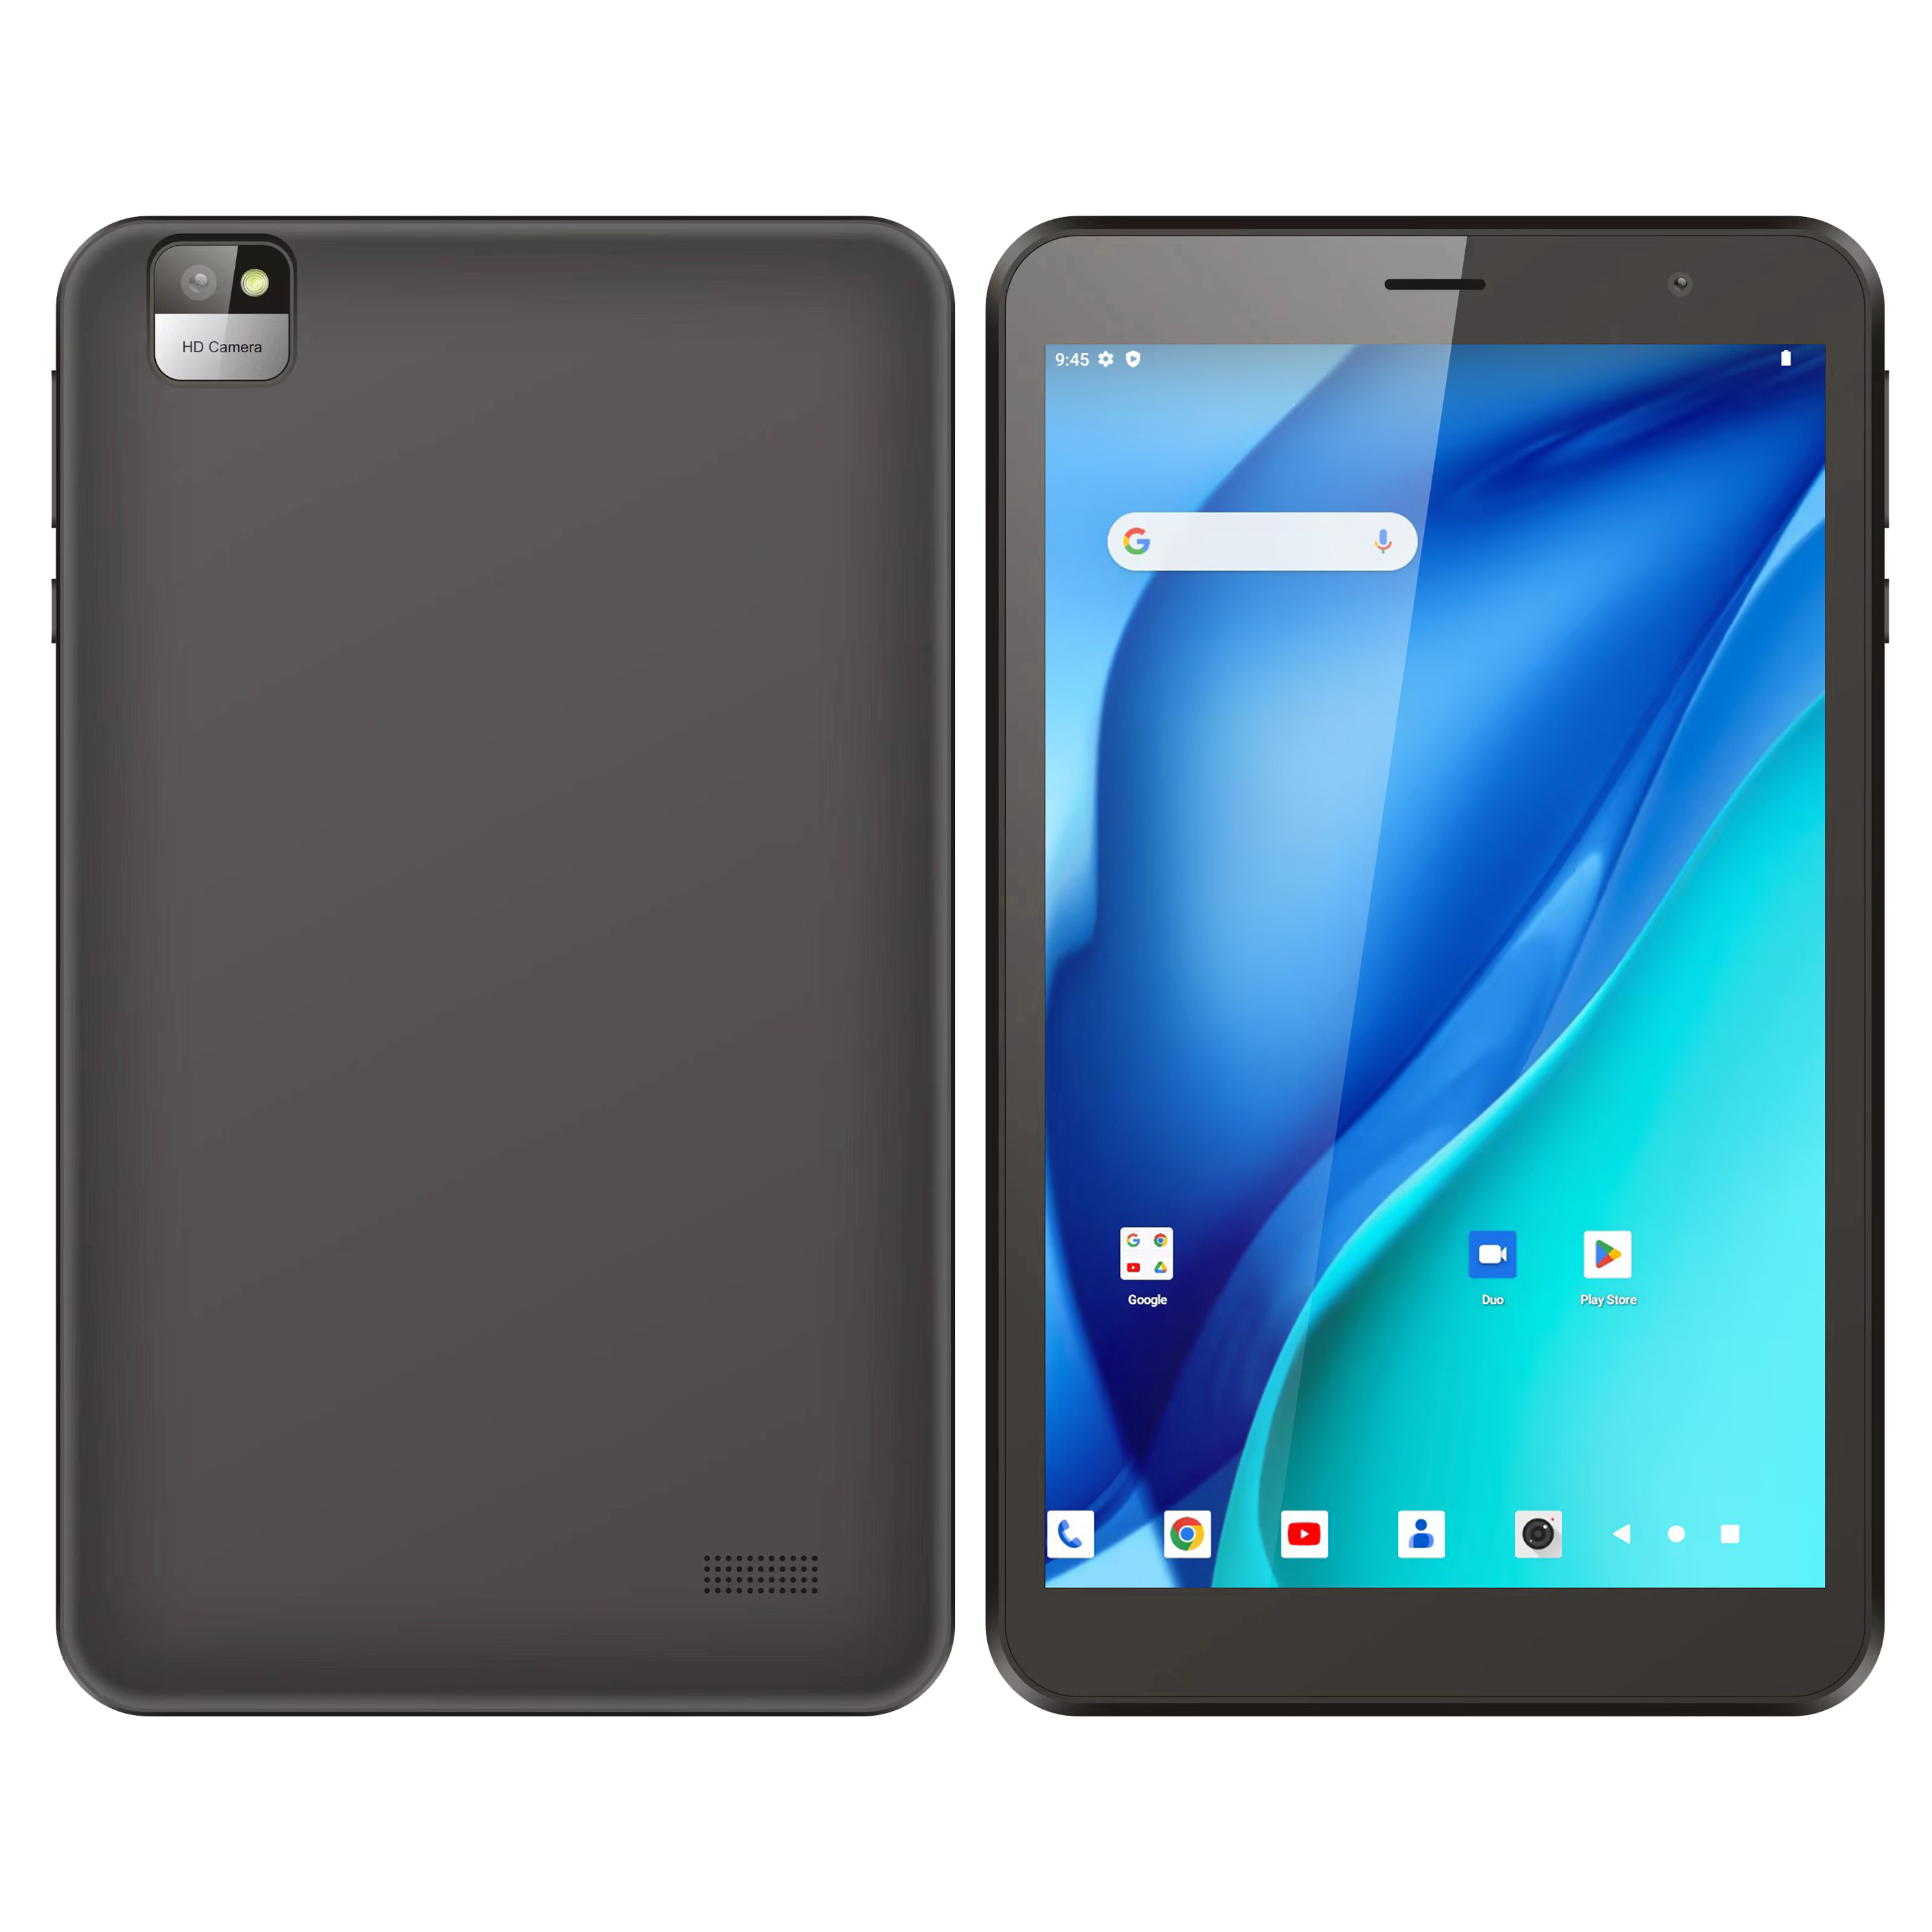 8" Tablet for office